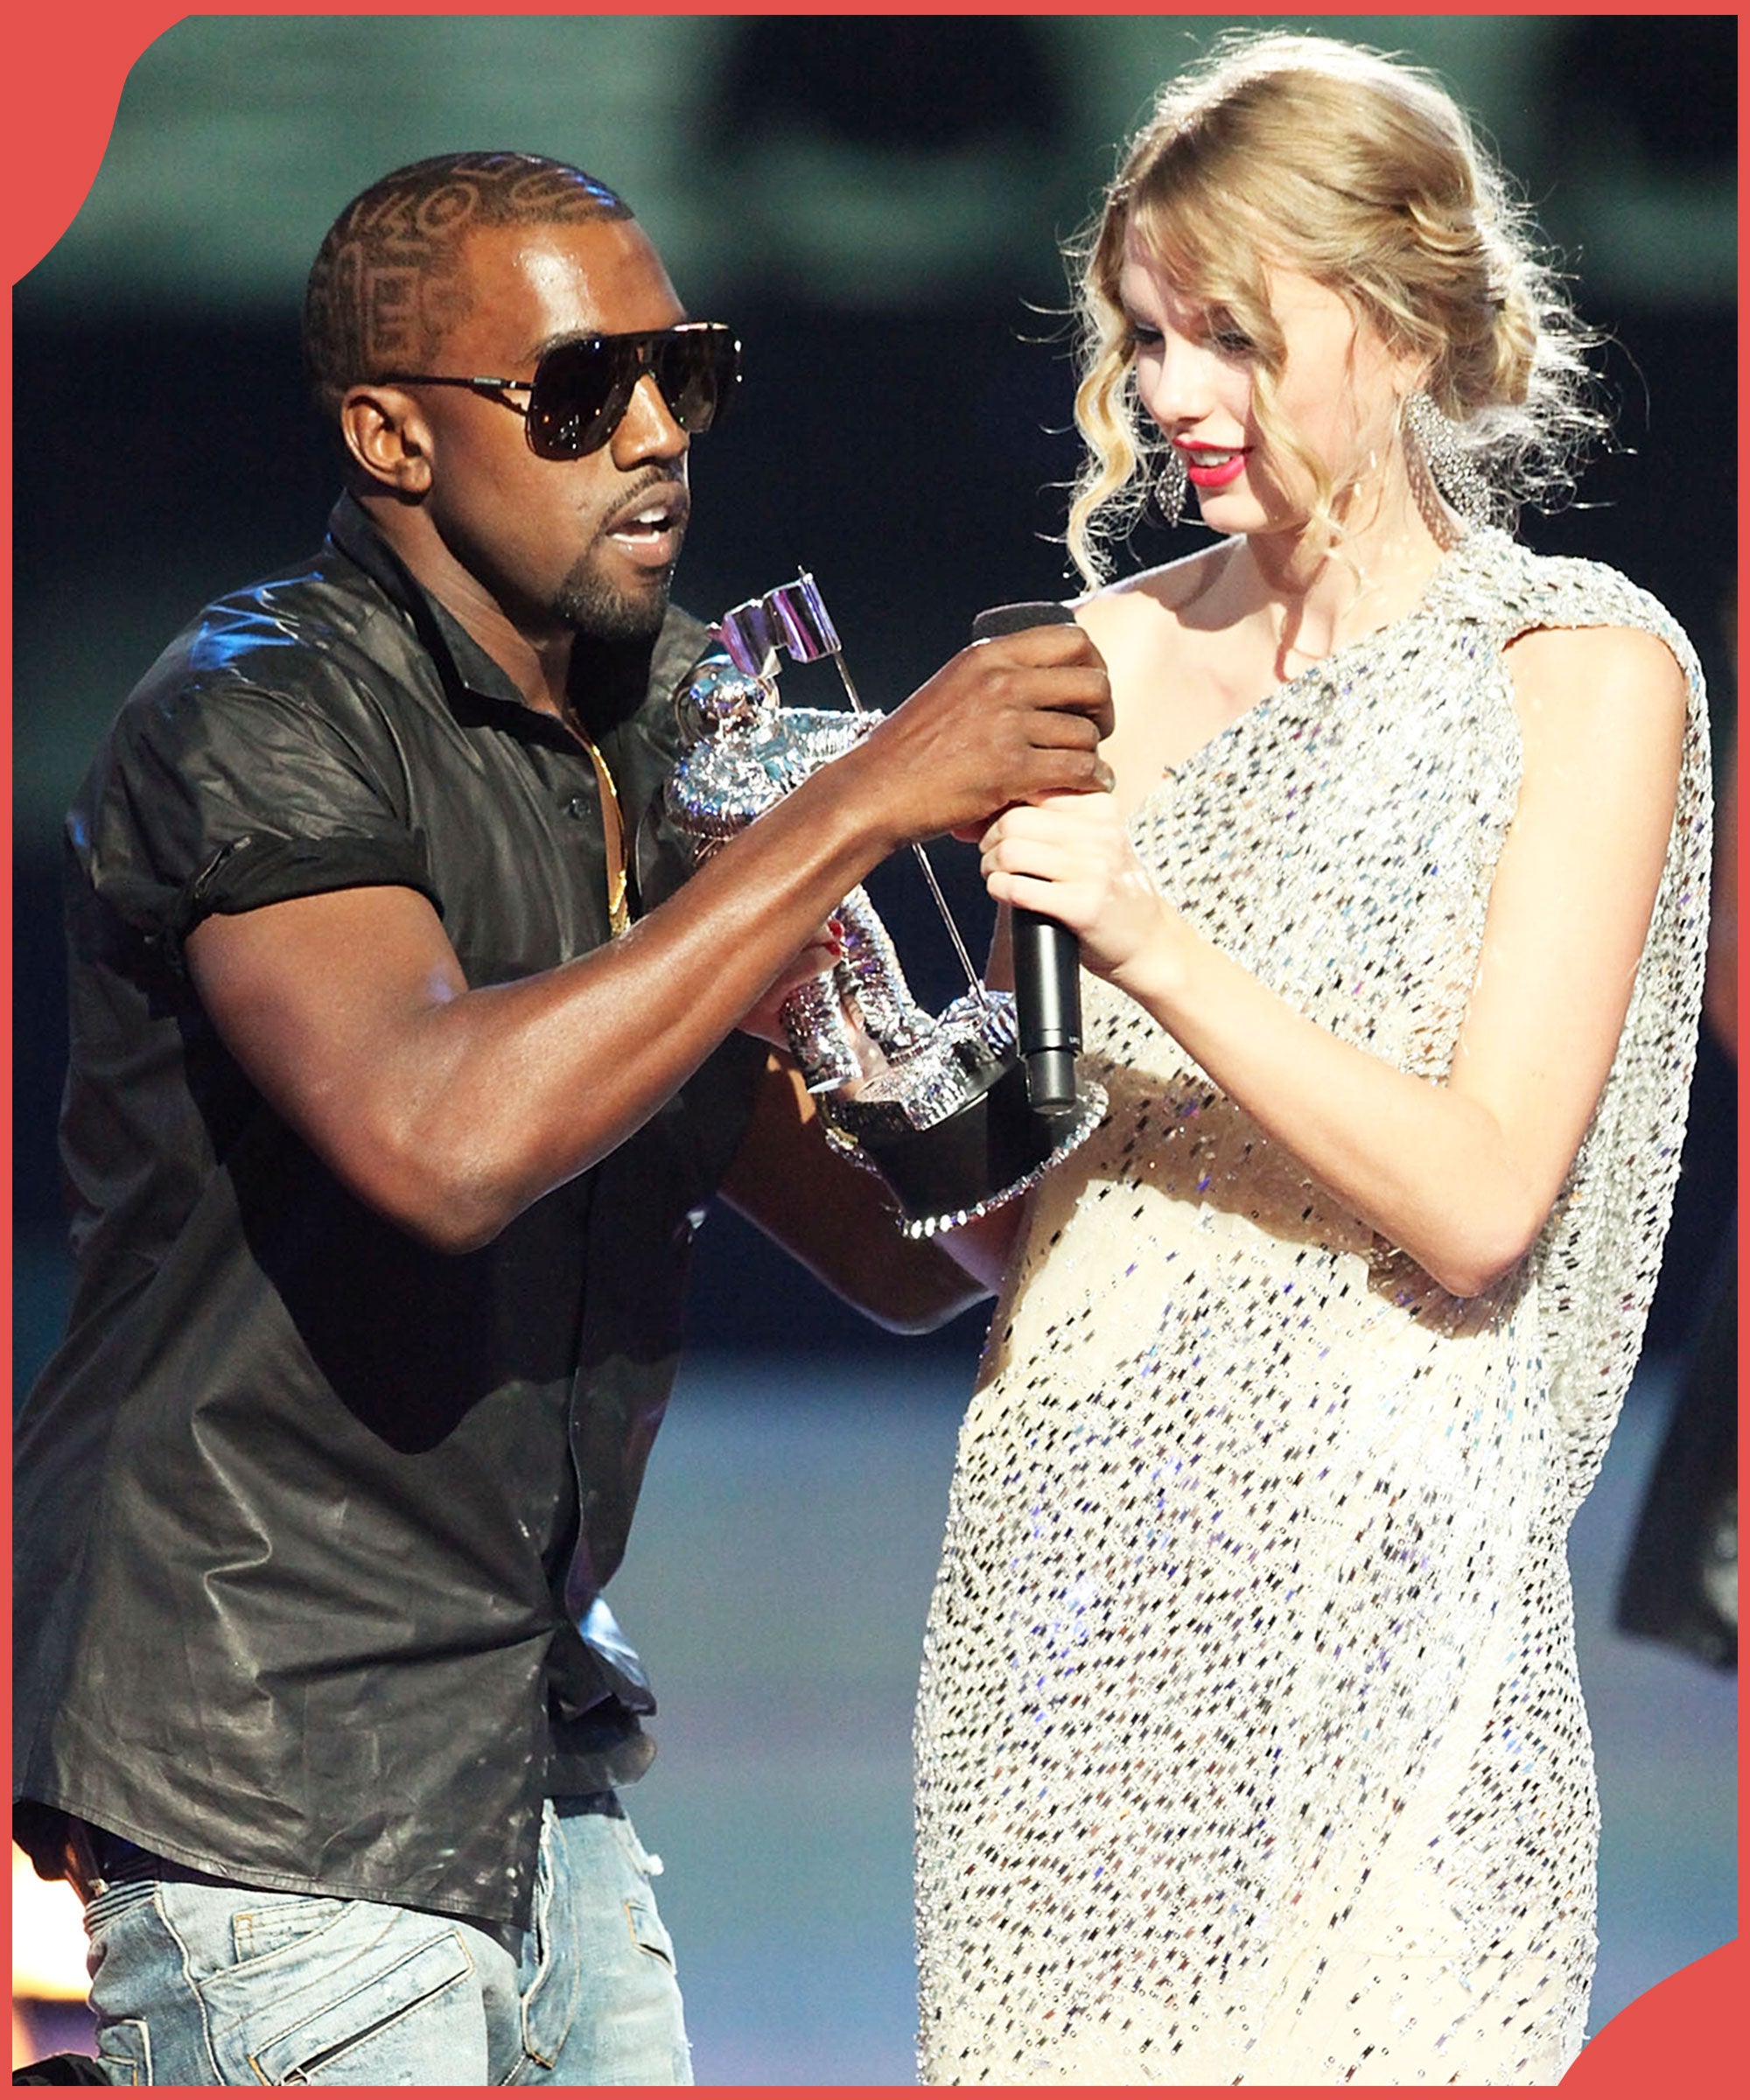 Austin Taylor Fucking - Kanye West Taylor Swift VMA Feud & Whats Happened Since